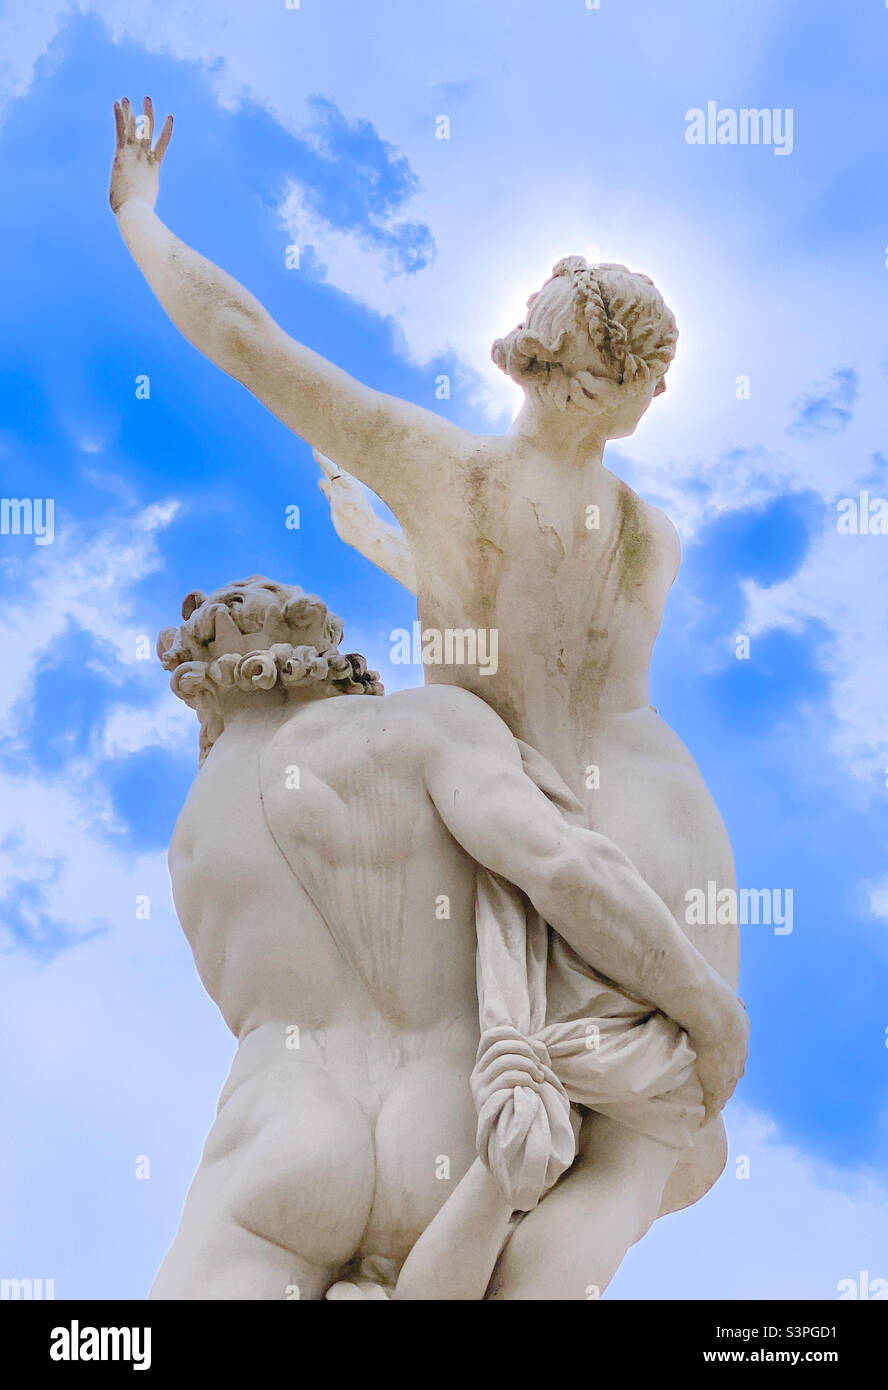 Copy of the classic Rape of the Sabines sculpture in the gardens of the palace of Versailles (Le Petit Parc) Stock Photo